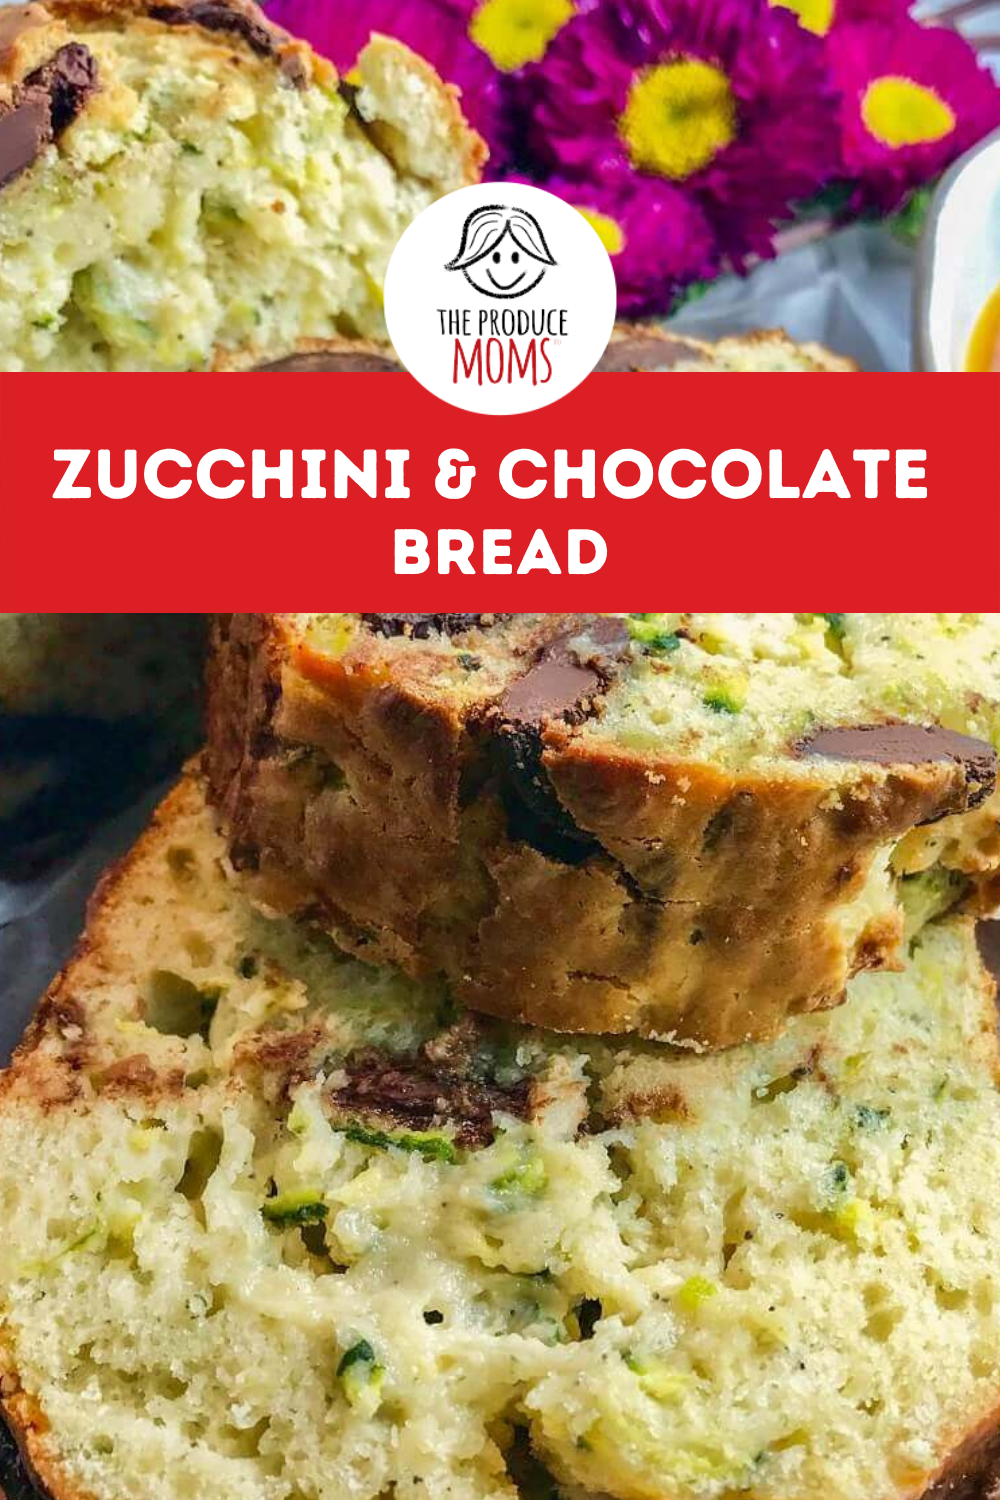 Pinterst Pins: Zucchini and Chocolate Bread